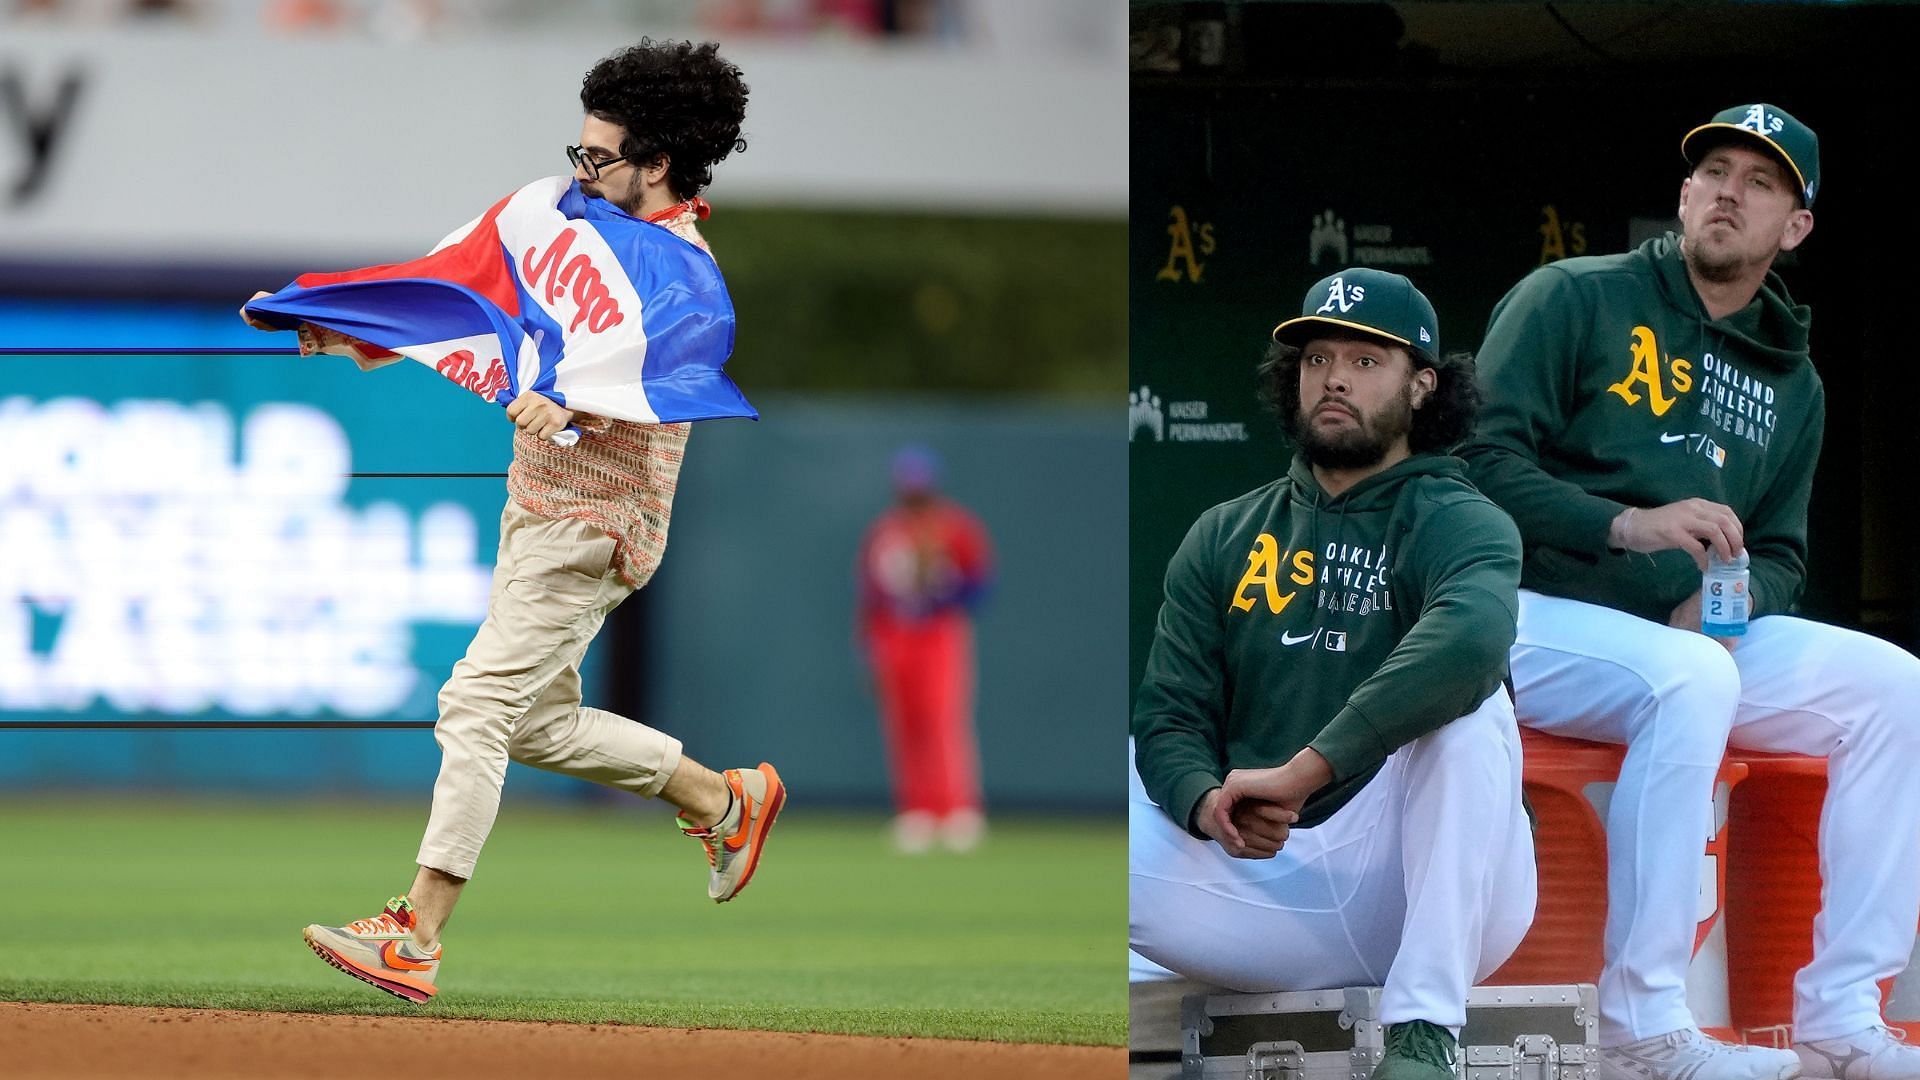 The Oakland Athletics had a muted reaction to a pre-game trespasser on the field